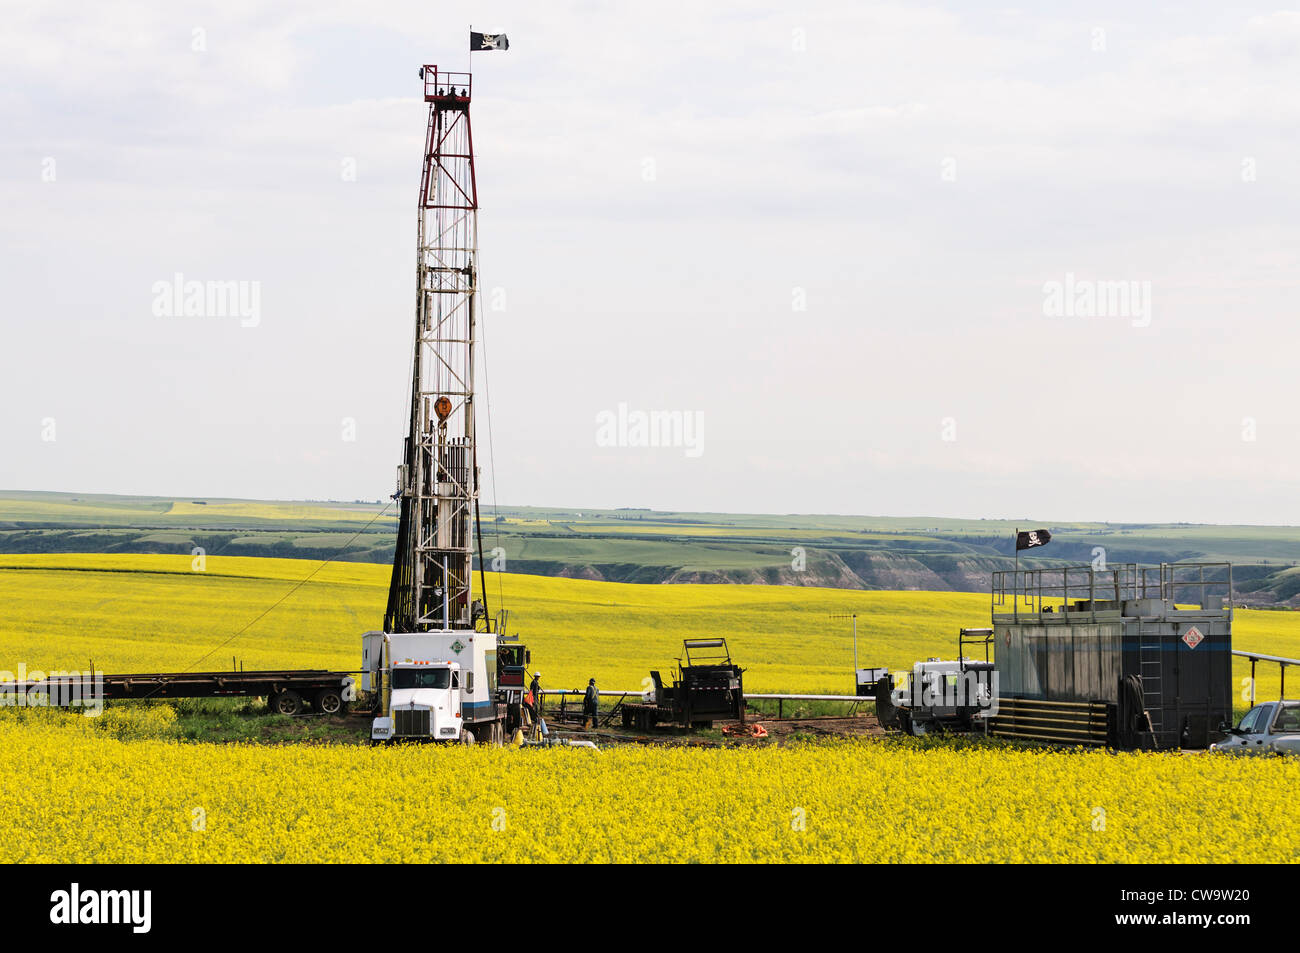 An oilfield drill rig drilling in a farmer's field of flowering canola (rapeseed), Drumheller, Alberta, Canada. Stock Photo